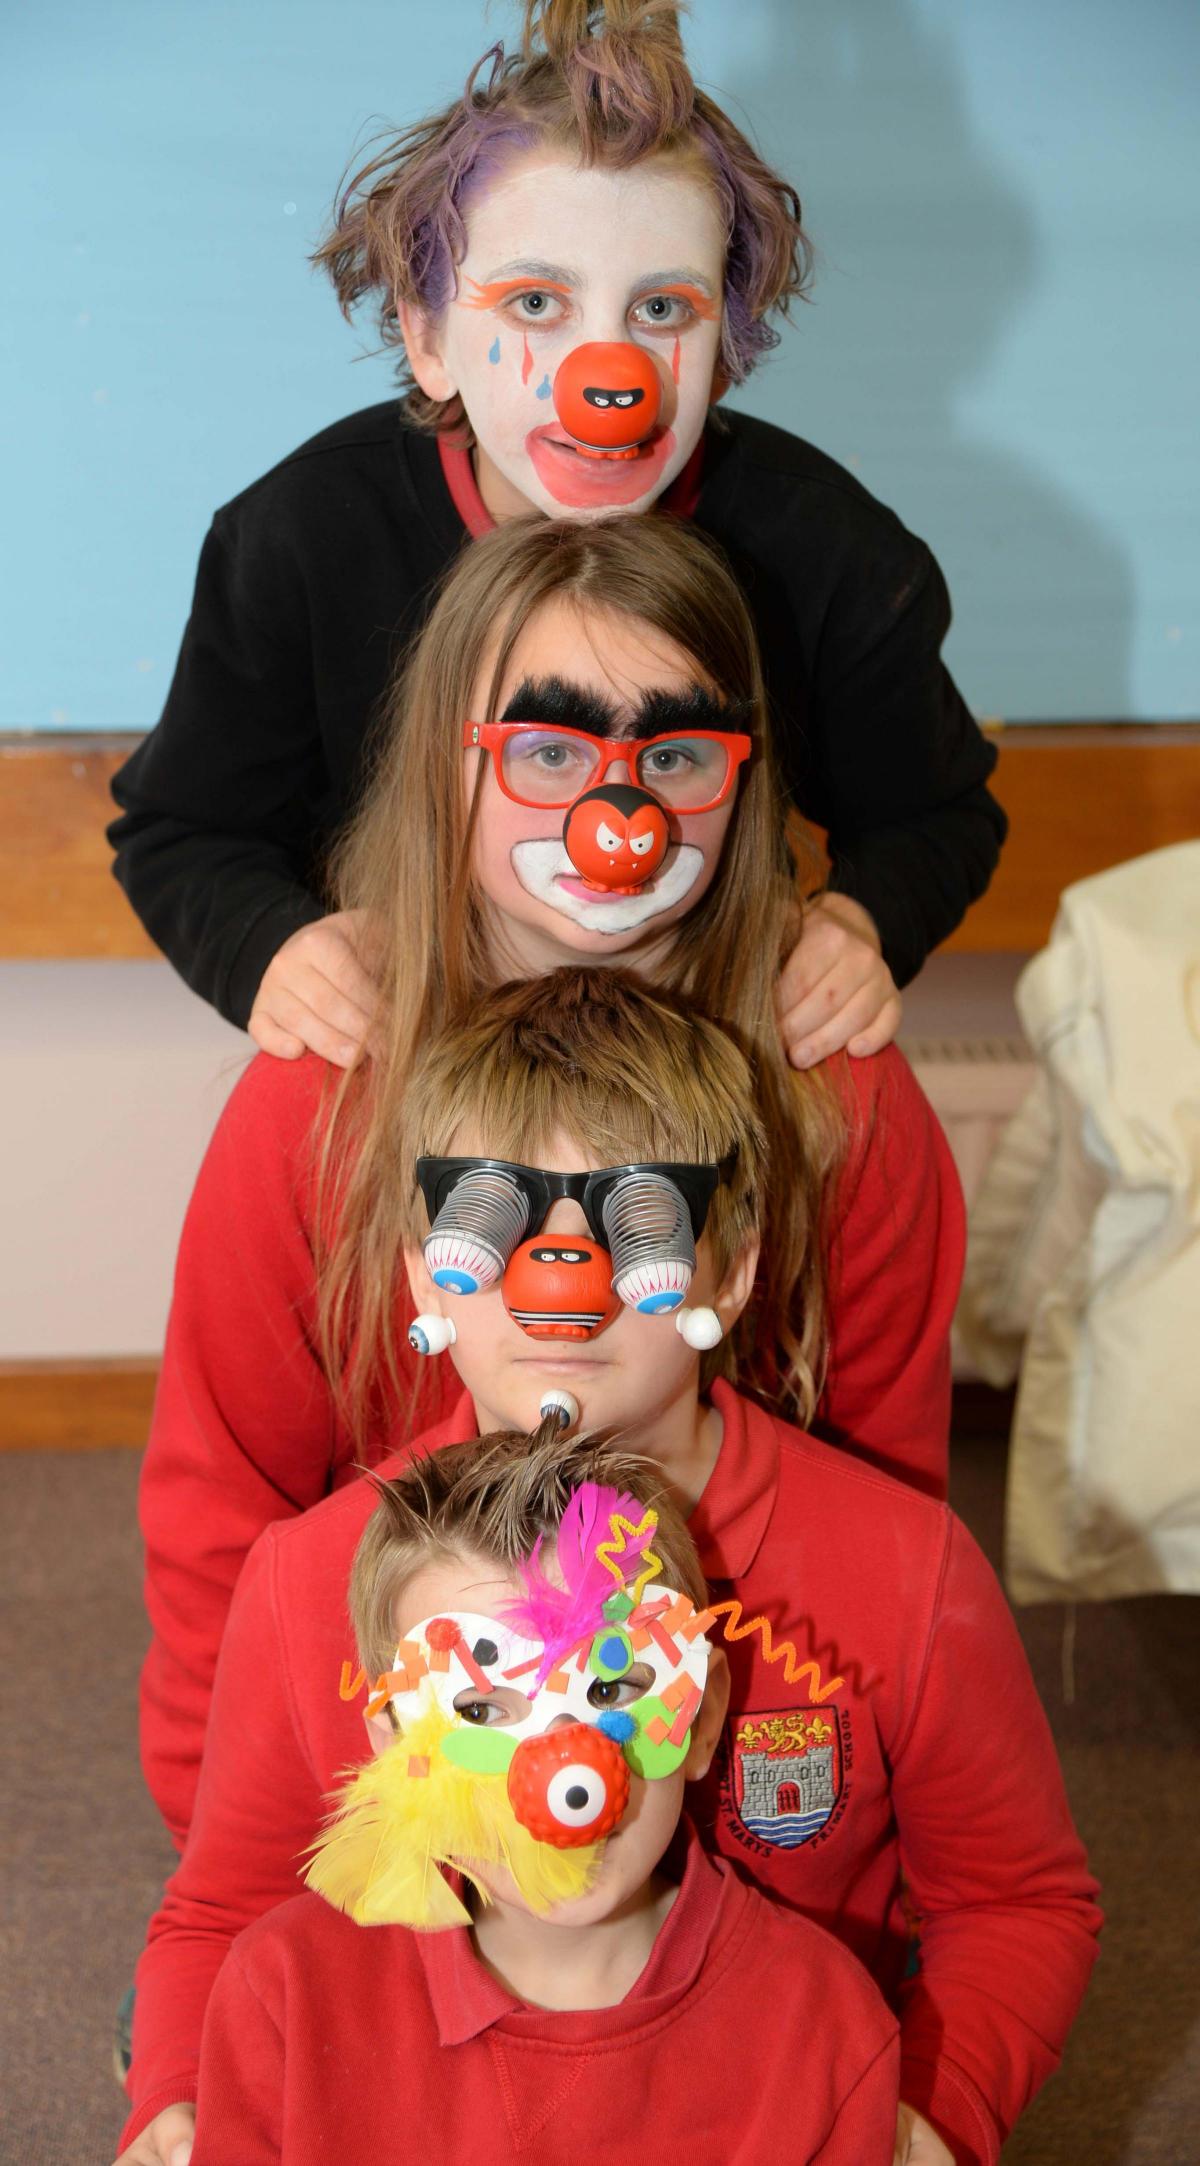 St. Mary's School, Bridport. Key stage 2 pupils dress up for Red Nose Day 2015